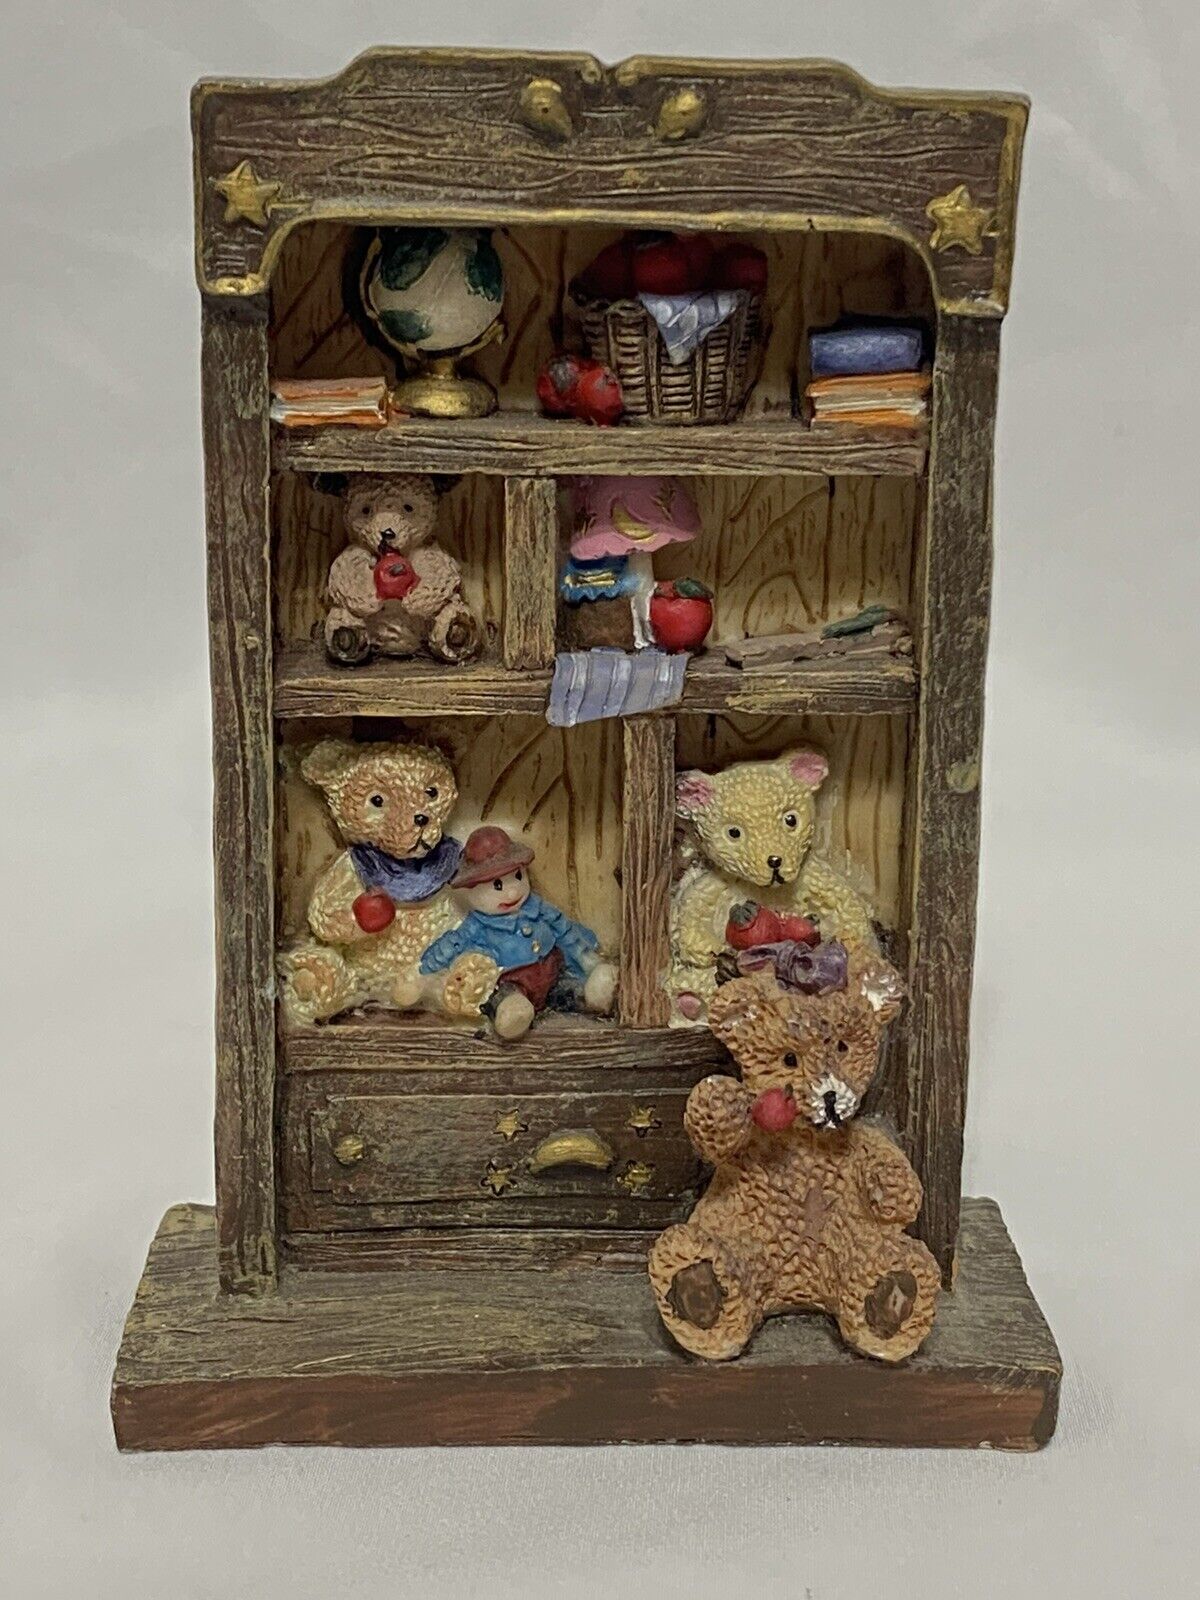 K's Collection 5” Resin Figurine Teddy Bears Bookcase Display Decor Statue